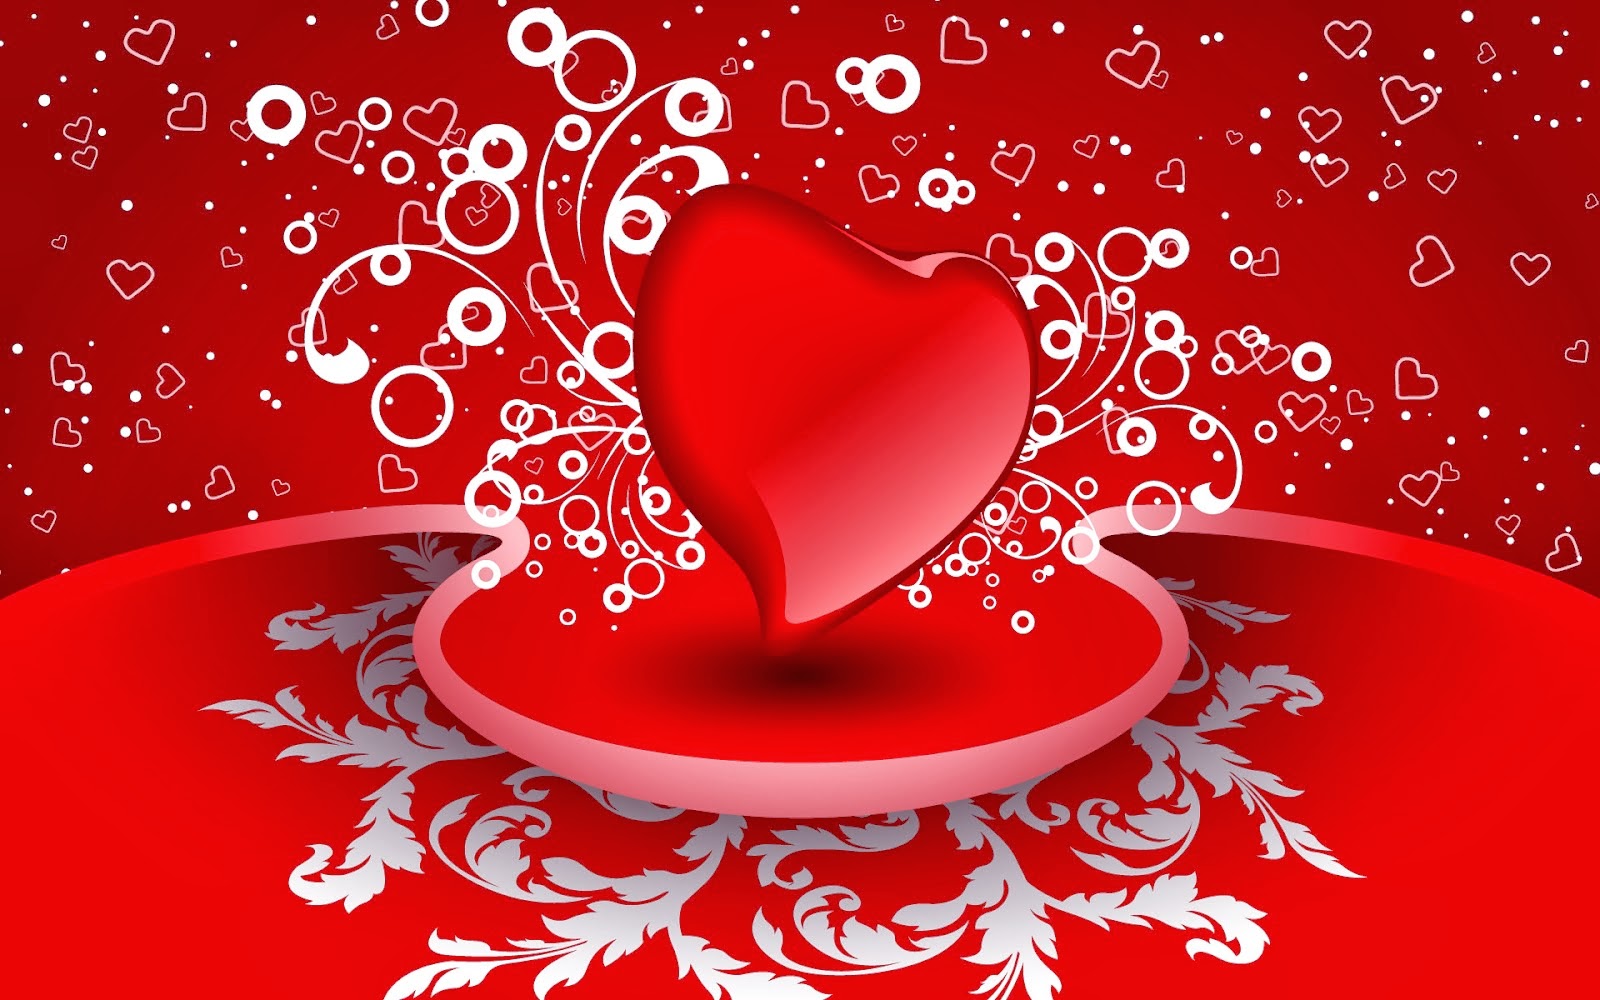 Beautiful Wallpaper And Image Valentine Day